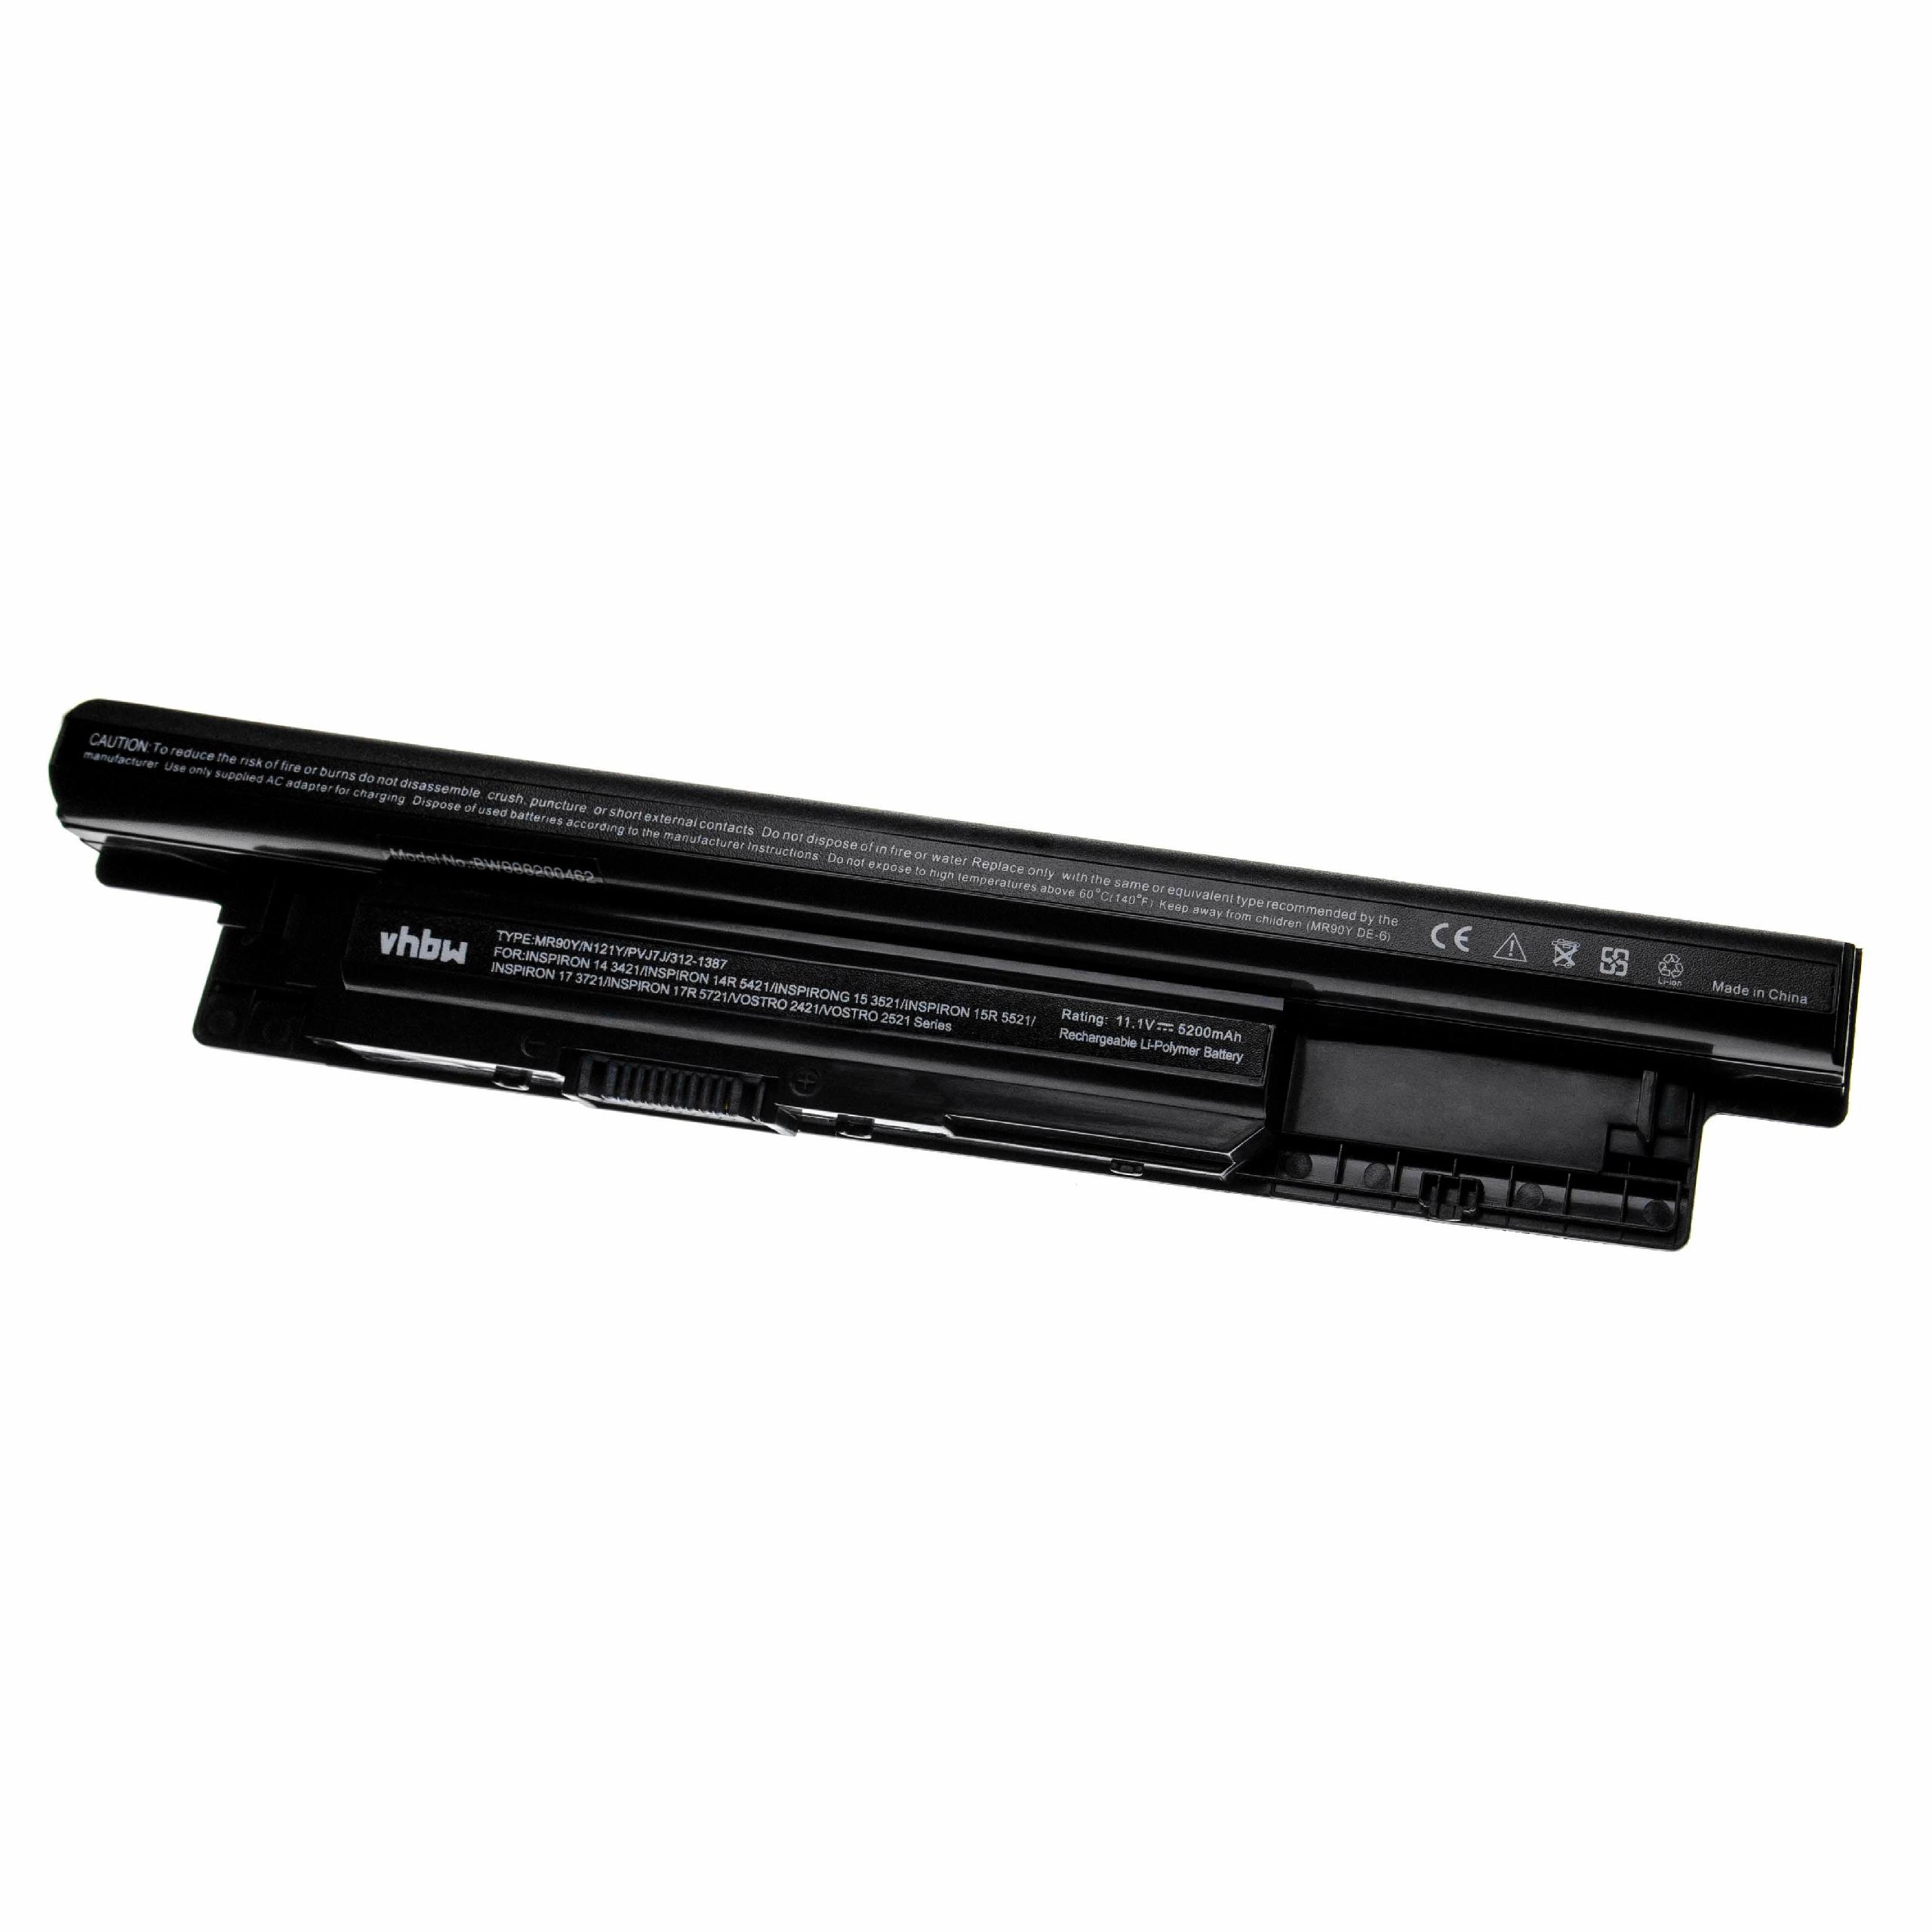 Notebook Battery Replacement for Dell 312-1387, 24DRM, 0MF69, 312-1390 - 5200mAh 11.1V Li-polymer, black